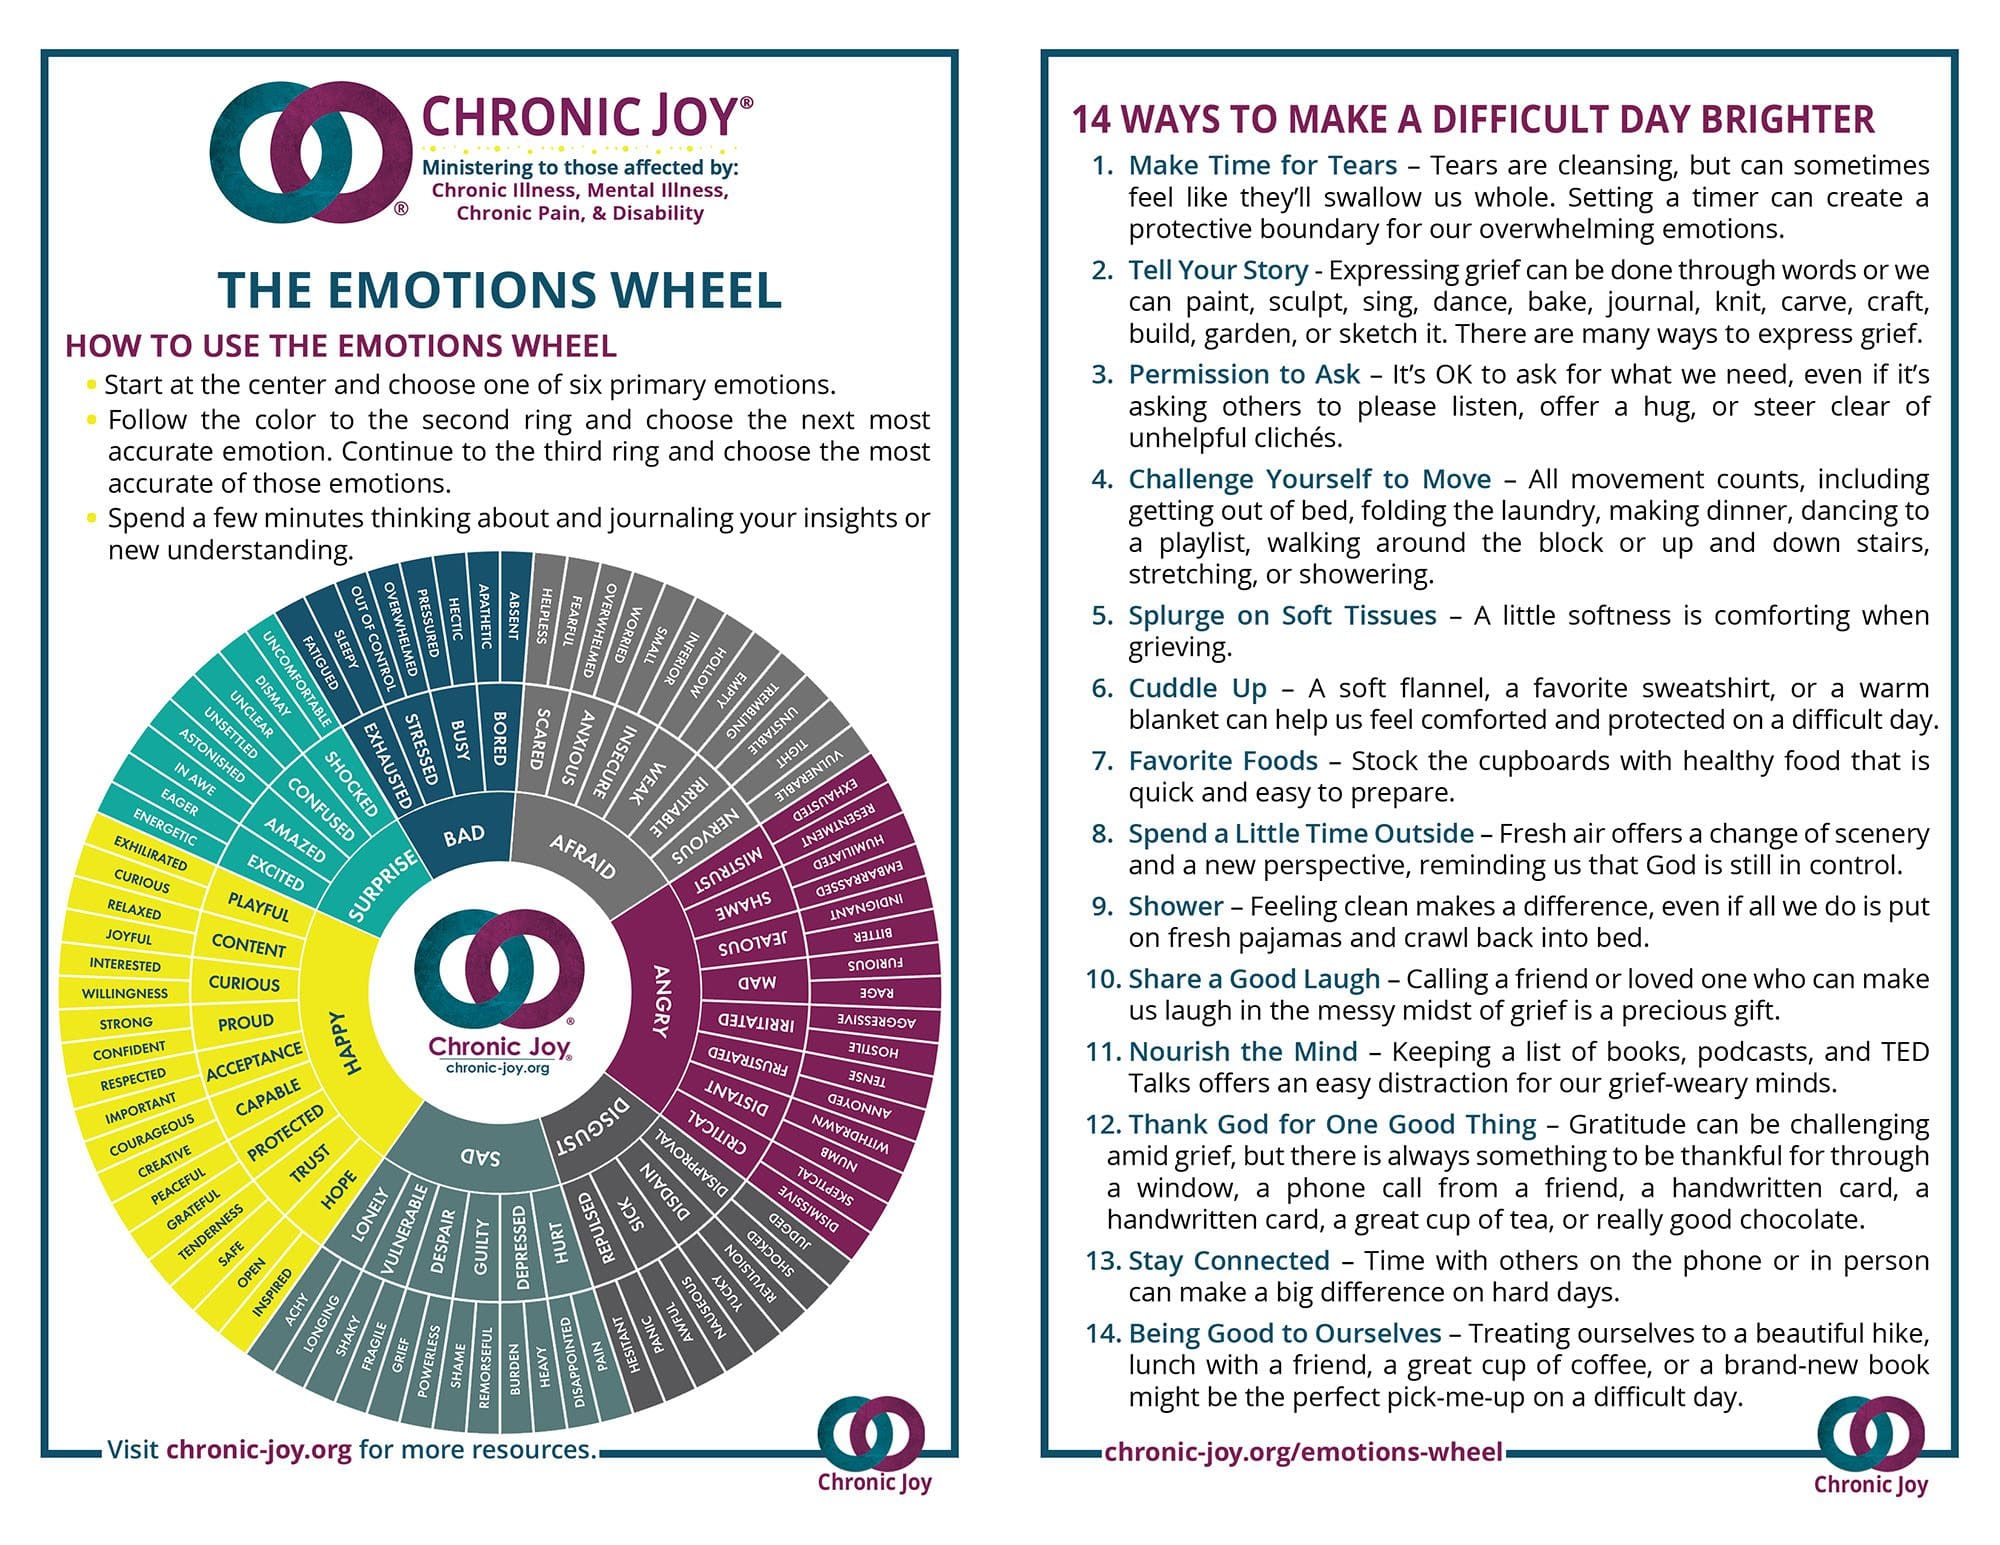 Emotions Wheel • 14 Ways to Make a Difficult Day Brighter